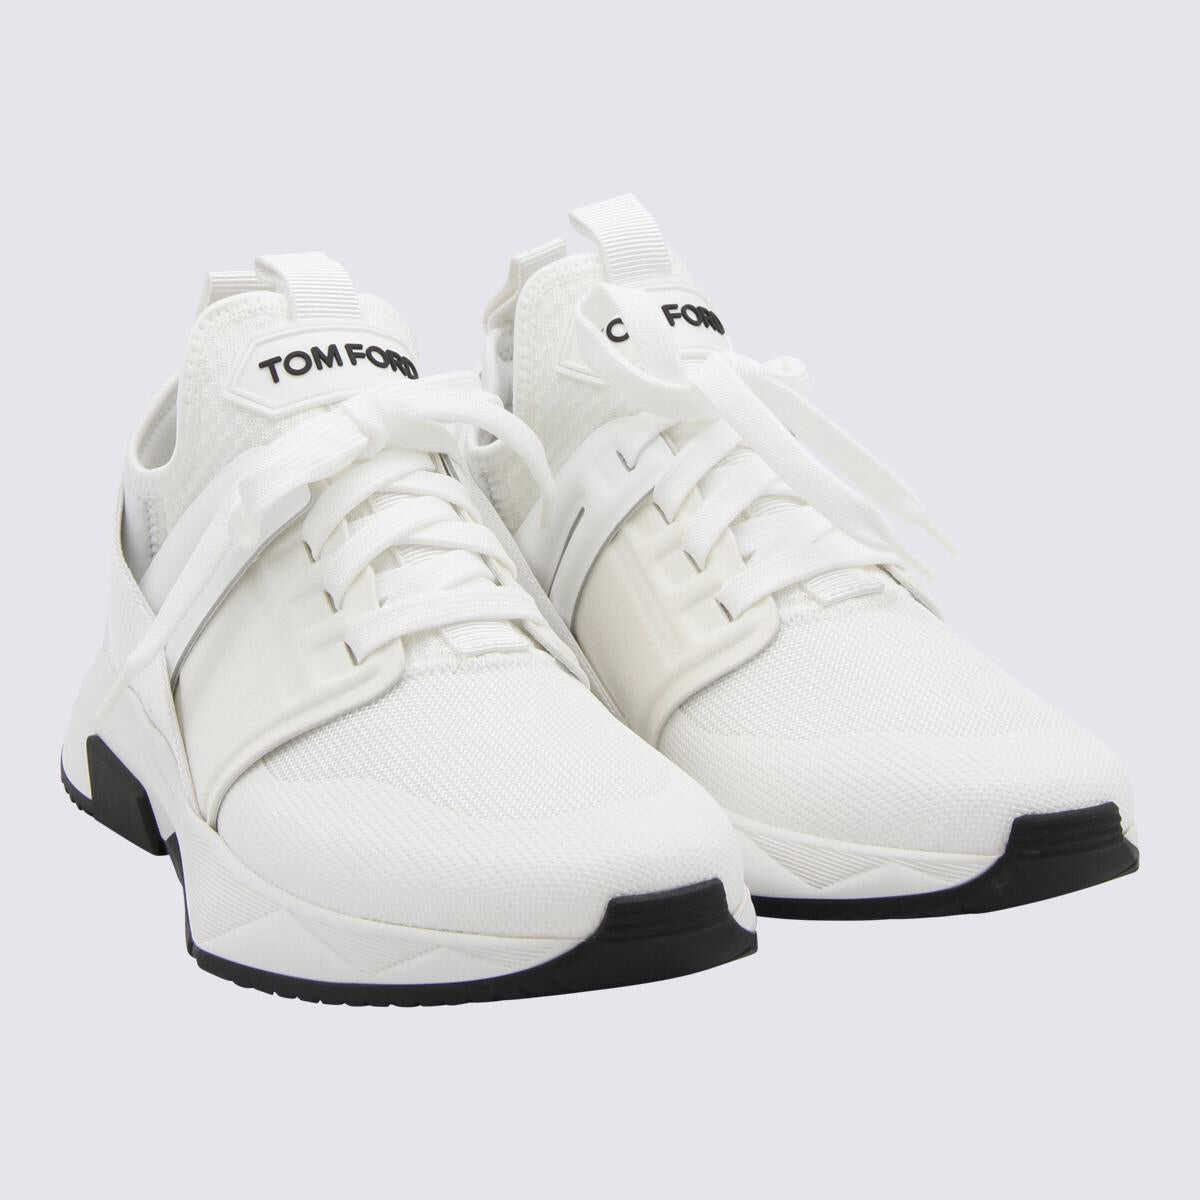 Tom Ford TOM FORD WHITE TECH JAGO SNEAKERS White